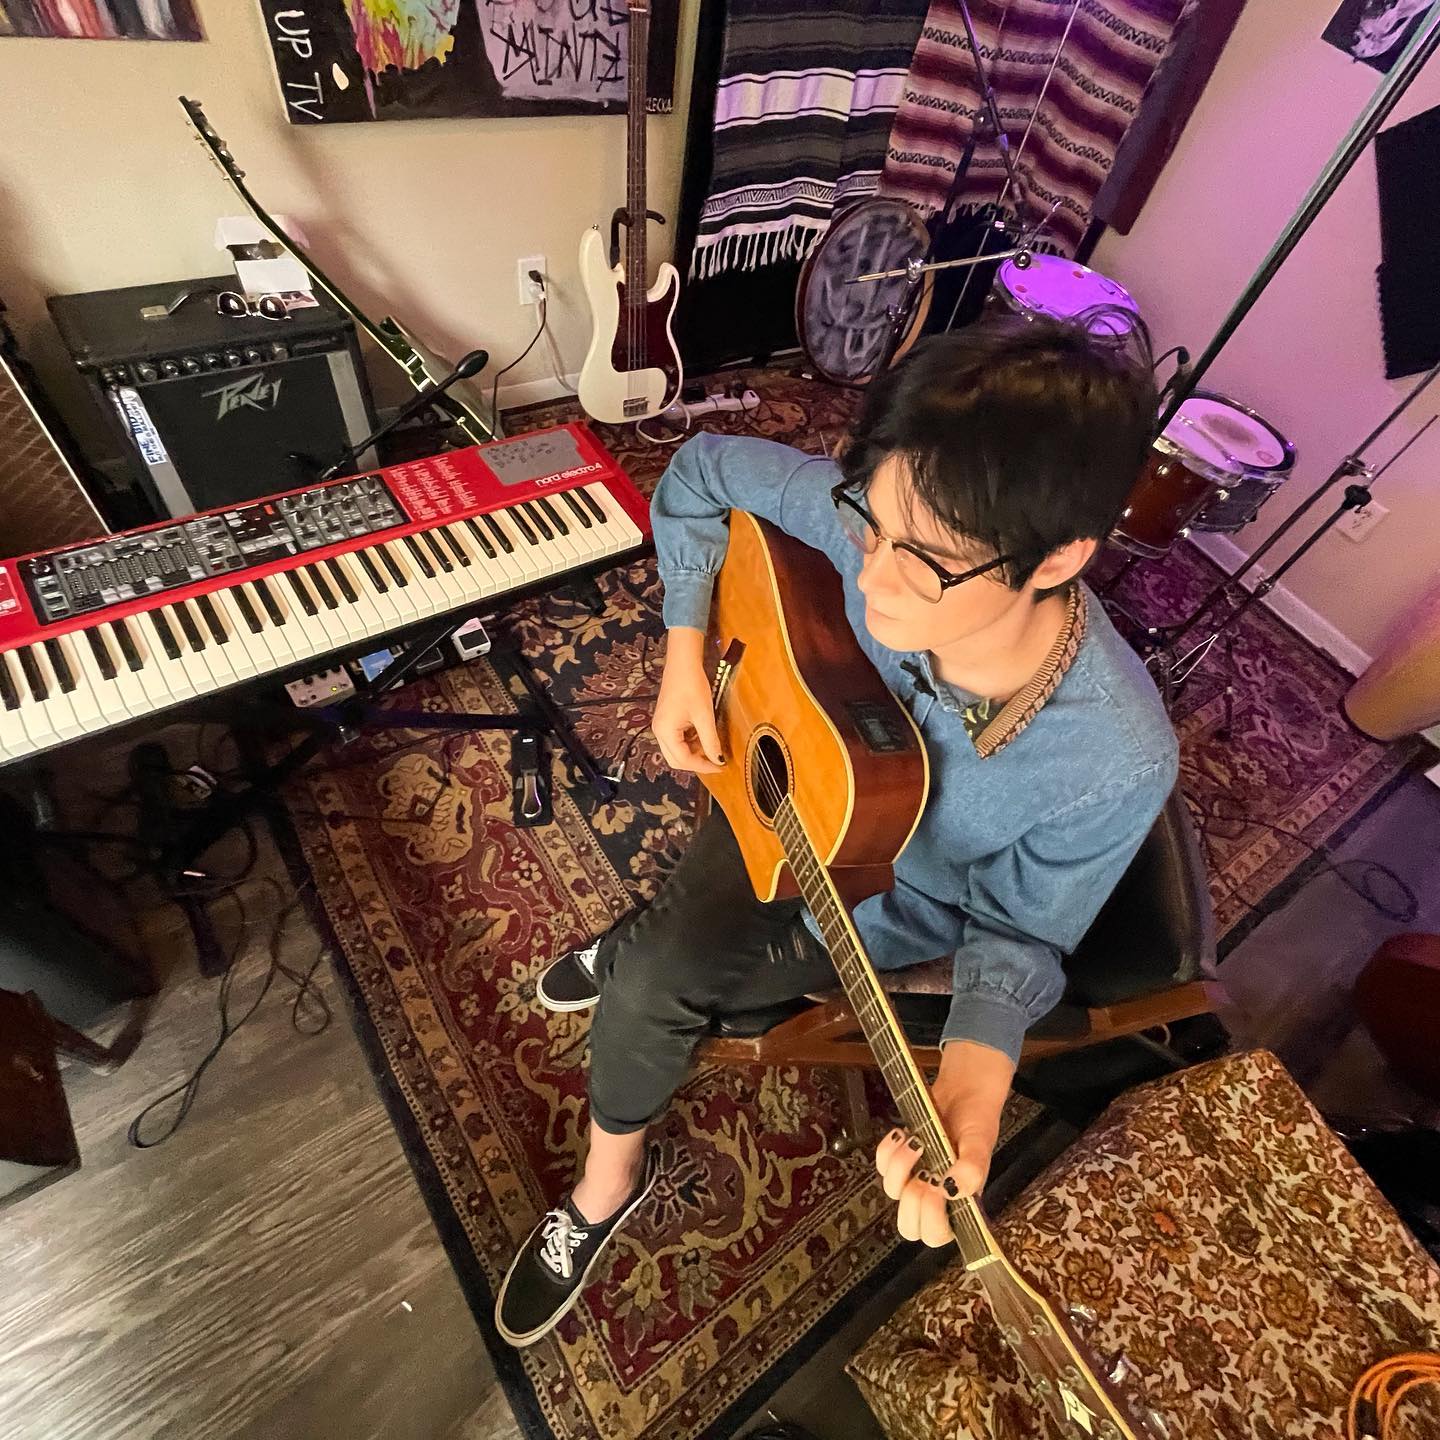 Quinn Decker playing guitar in their home studio surrounded by instruments